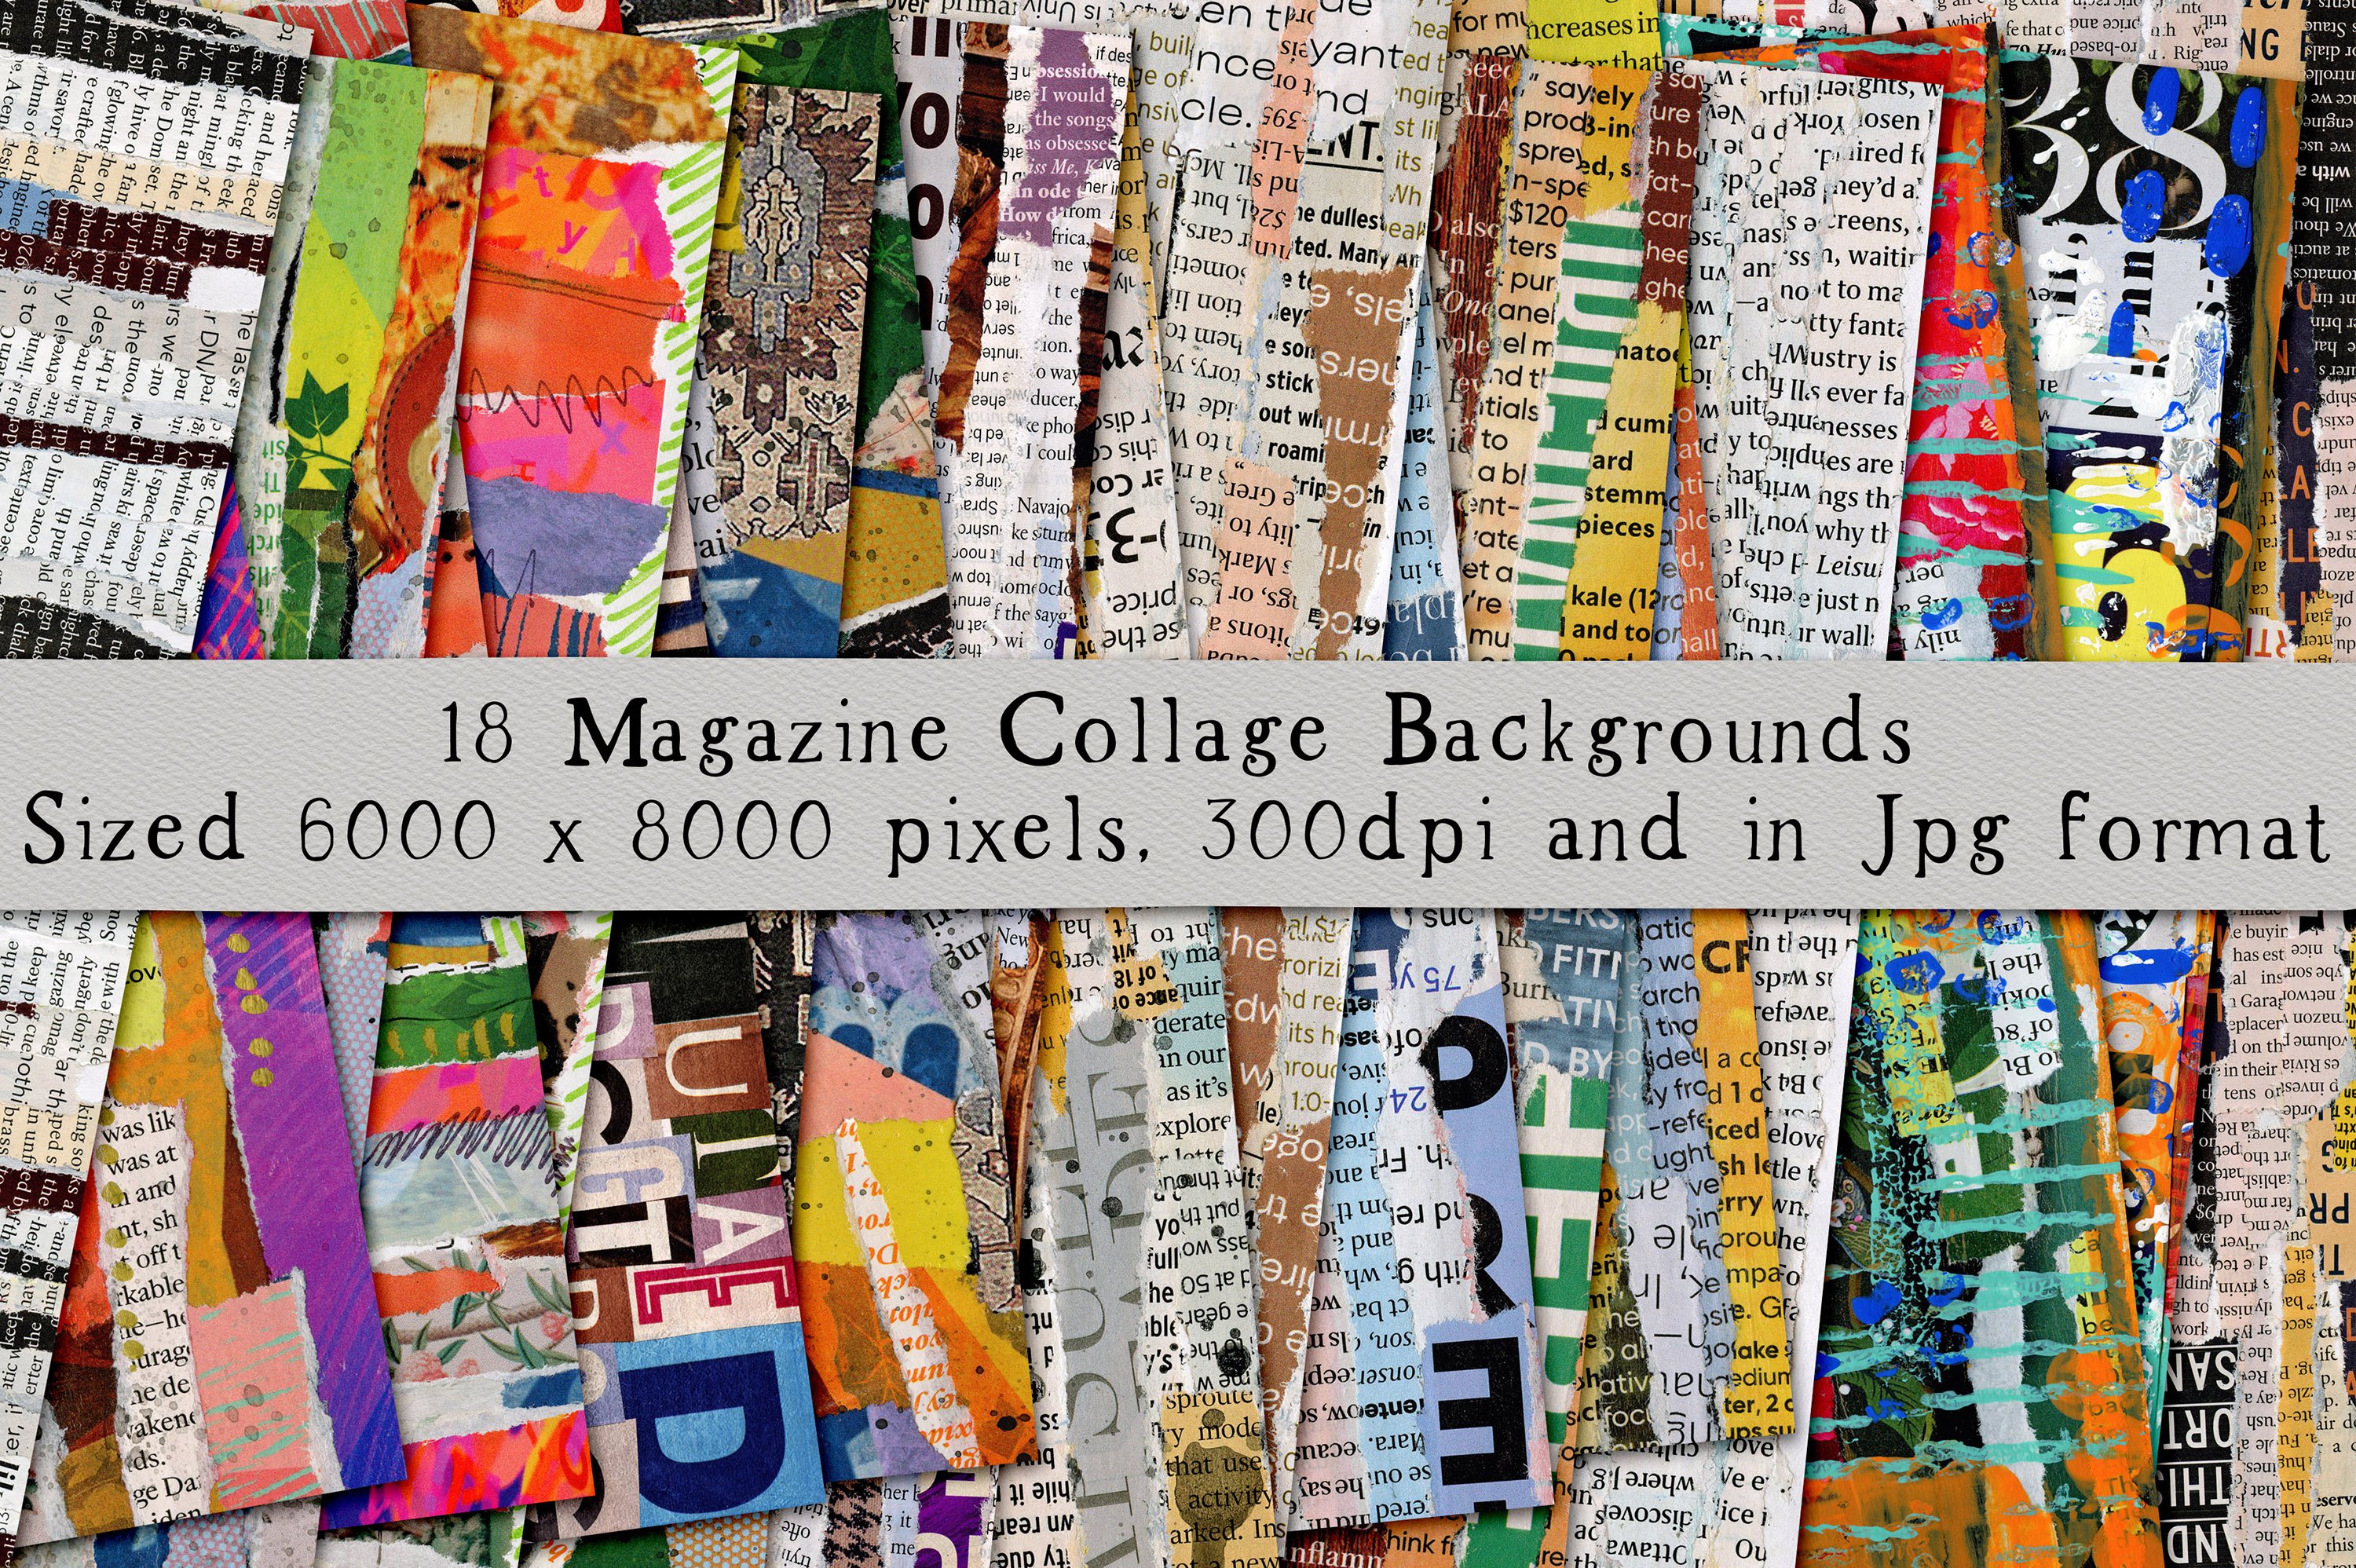 Paper Collage Png's and Backgrounds-6.jpg